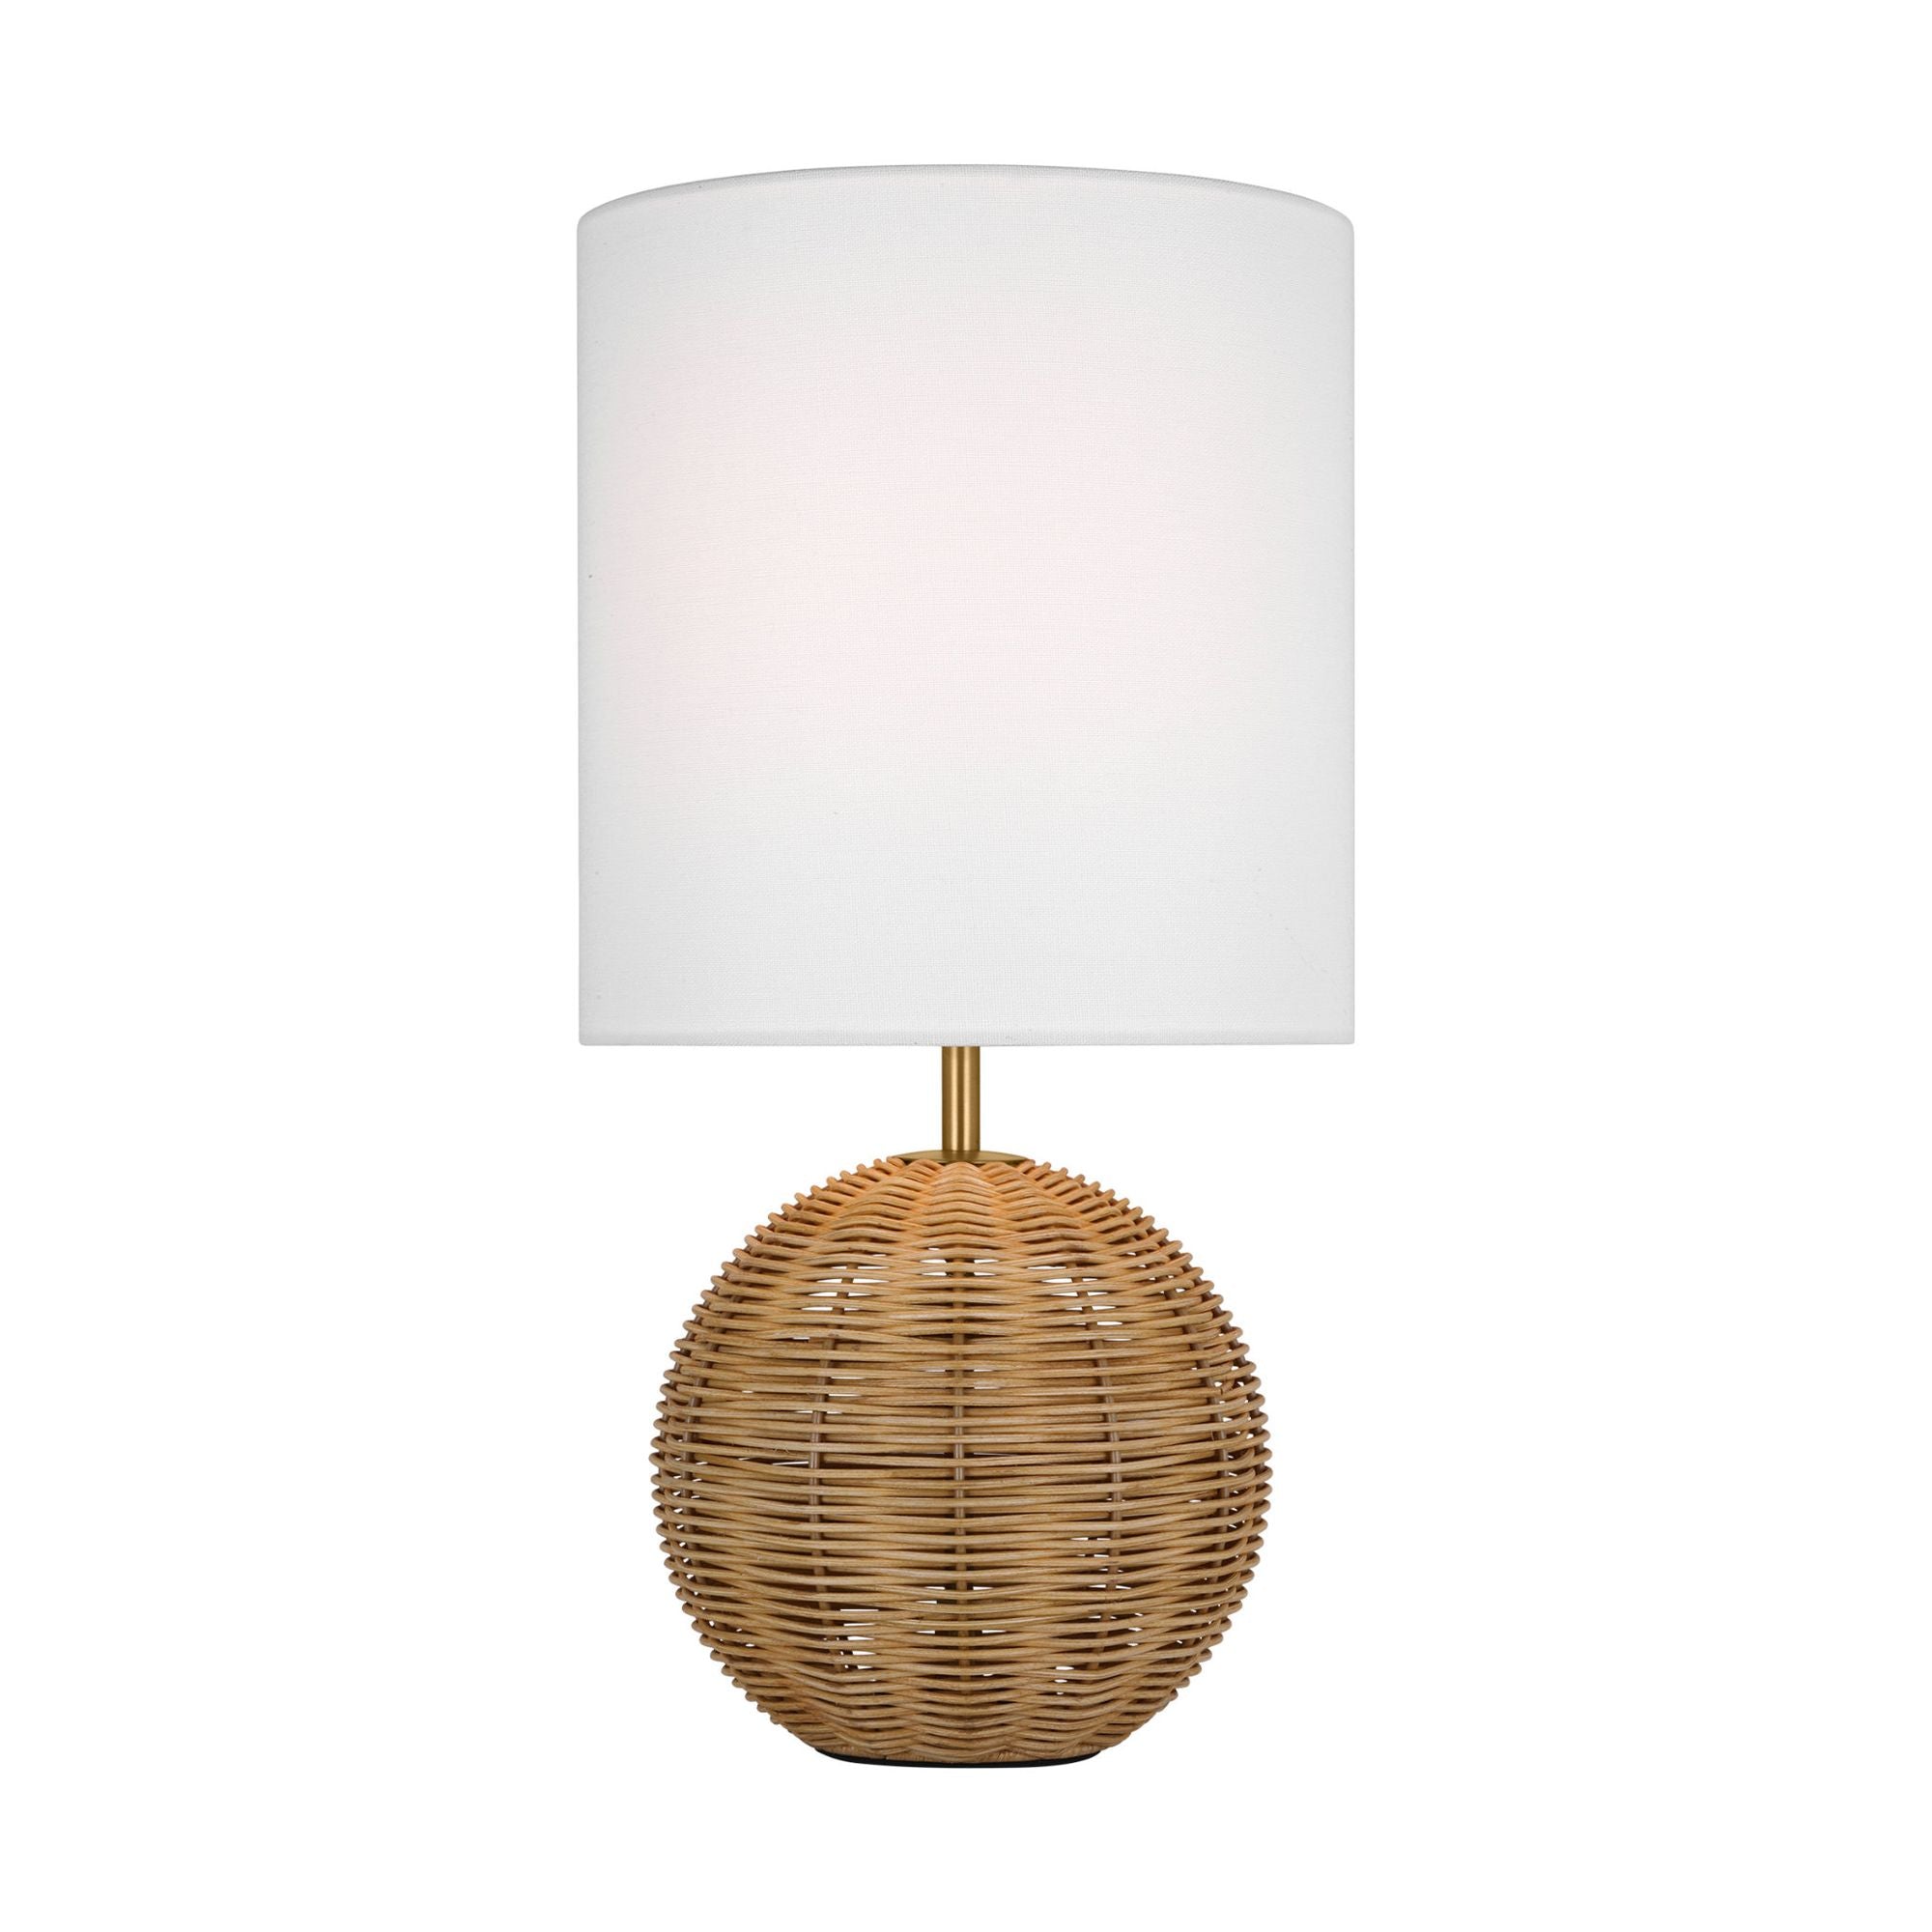 kate spade new york Mari Small Table Lamp in Burnished Brass